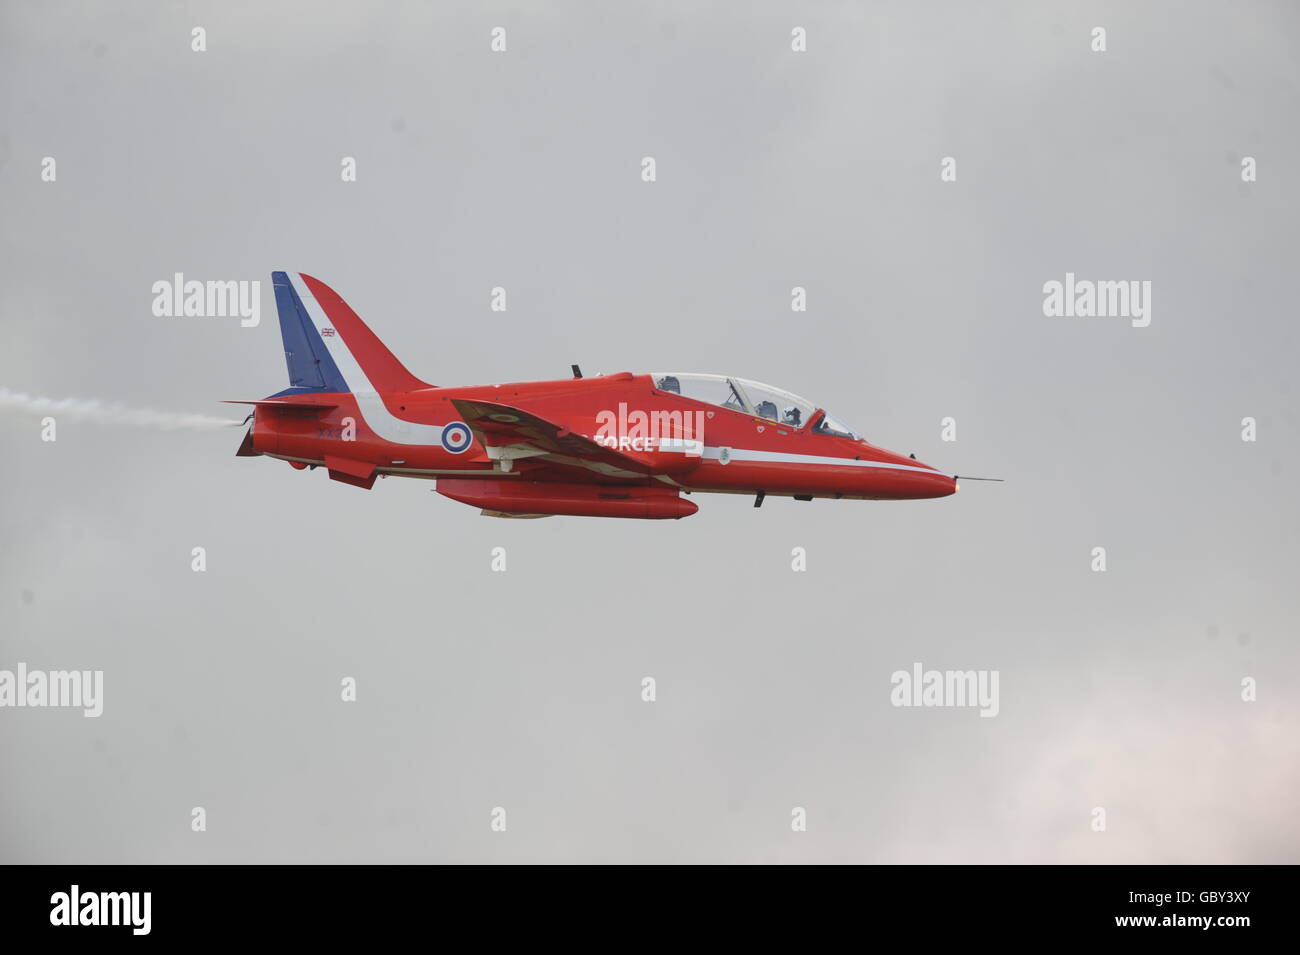 The Red Arrows, the Royal Air Force Acrobatic Team, bases at RAF Scampton flying BAe Hawk aircraft at the Royal International Air Tattoo at RAF Fairford, Gloucestershire. Stock Photo